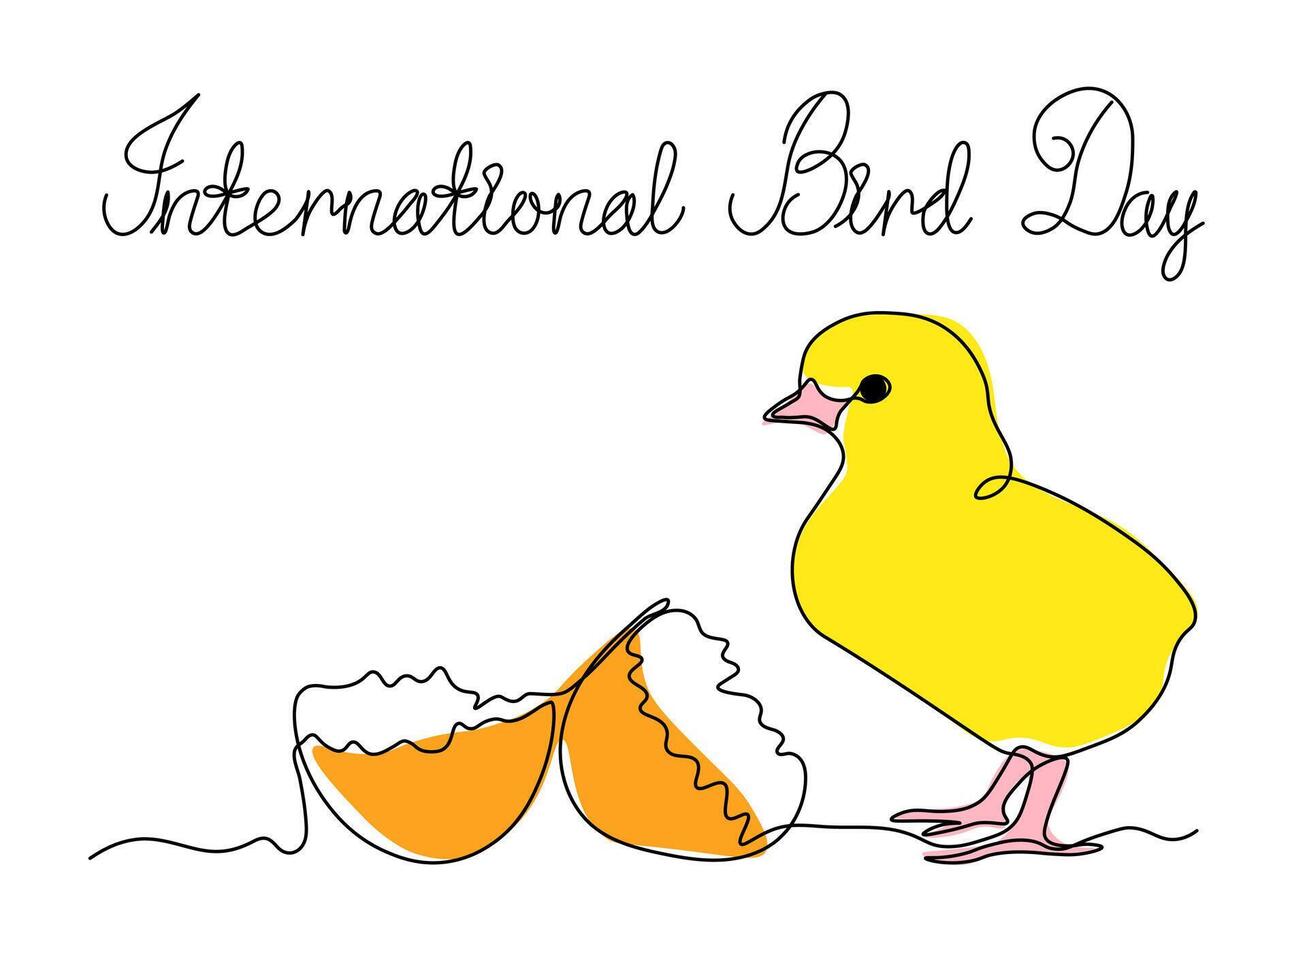 Abstract chicken hatched from the egg,continuous single line art hand drawing sketch, logo of the International Bird Day vector